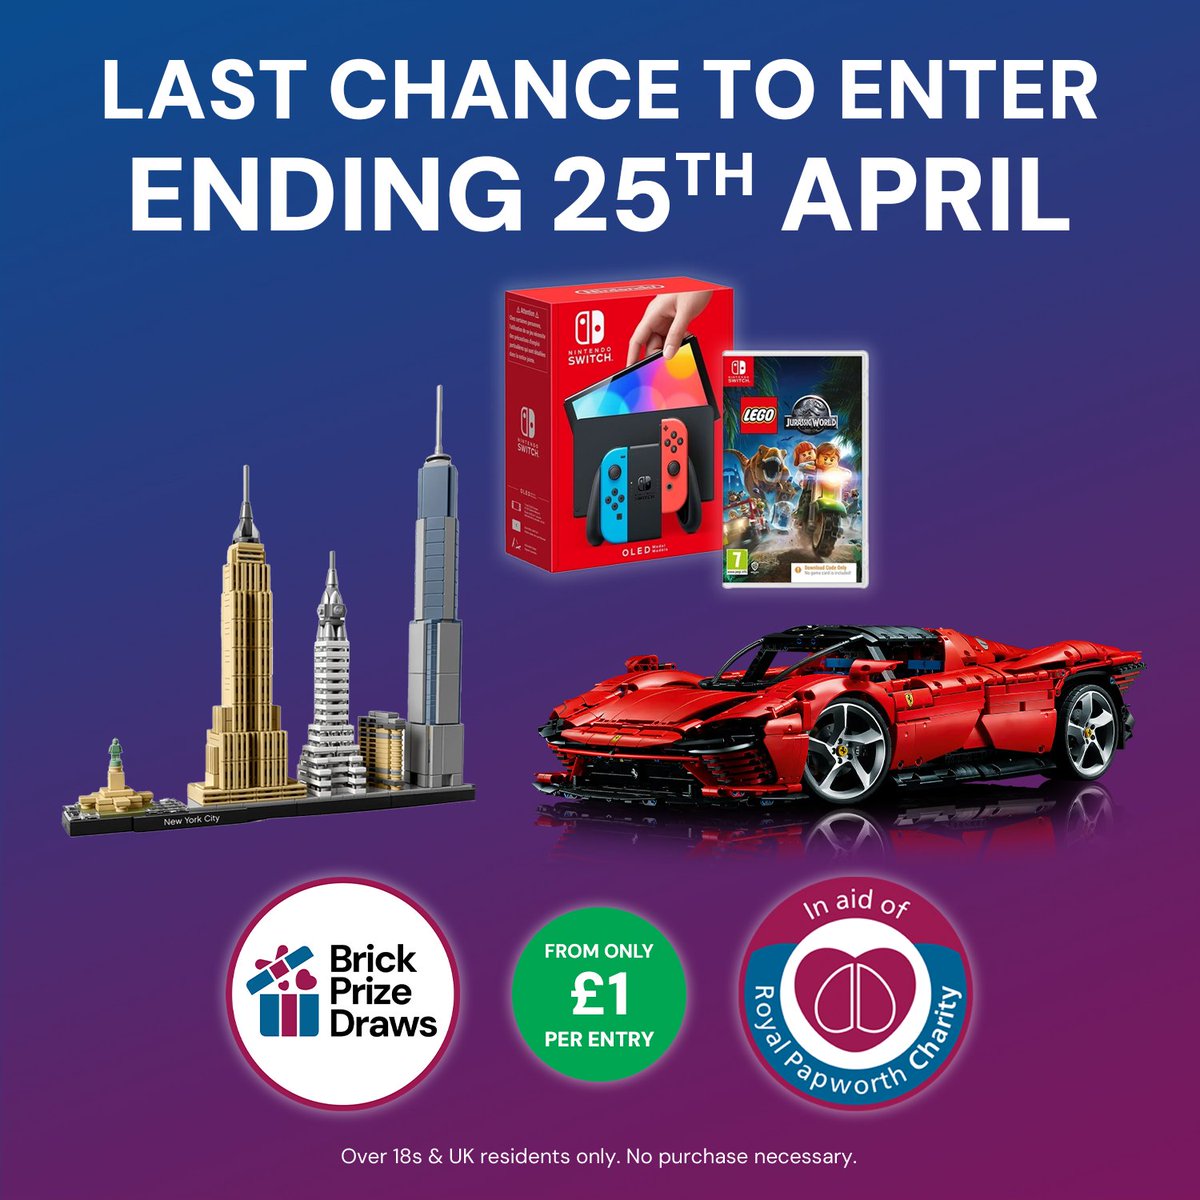 📣 LAST CHANCE TO ENTER: The final 3 draws of our launch collection are ending soon on April 25th!

🏆 With plenty of entries left, your odds of winning a fantastic LEGO prize are better than ever! Don't miss out, enter now!

brickprizedraws.com

#LEGO #PrizeDraws #LastChance